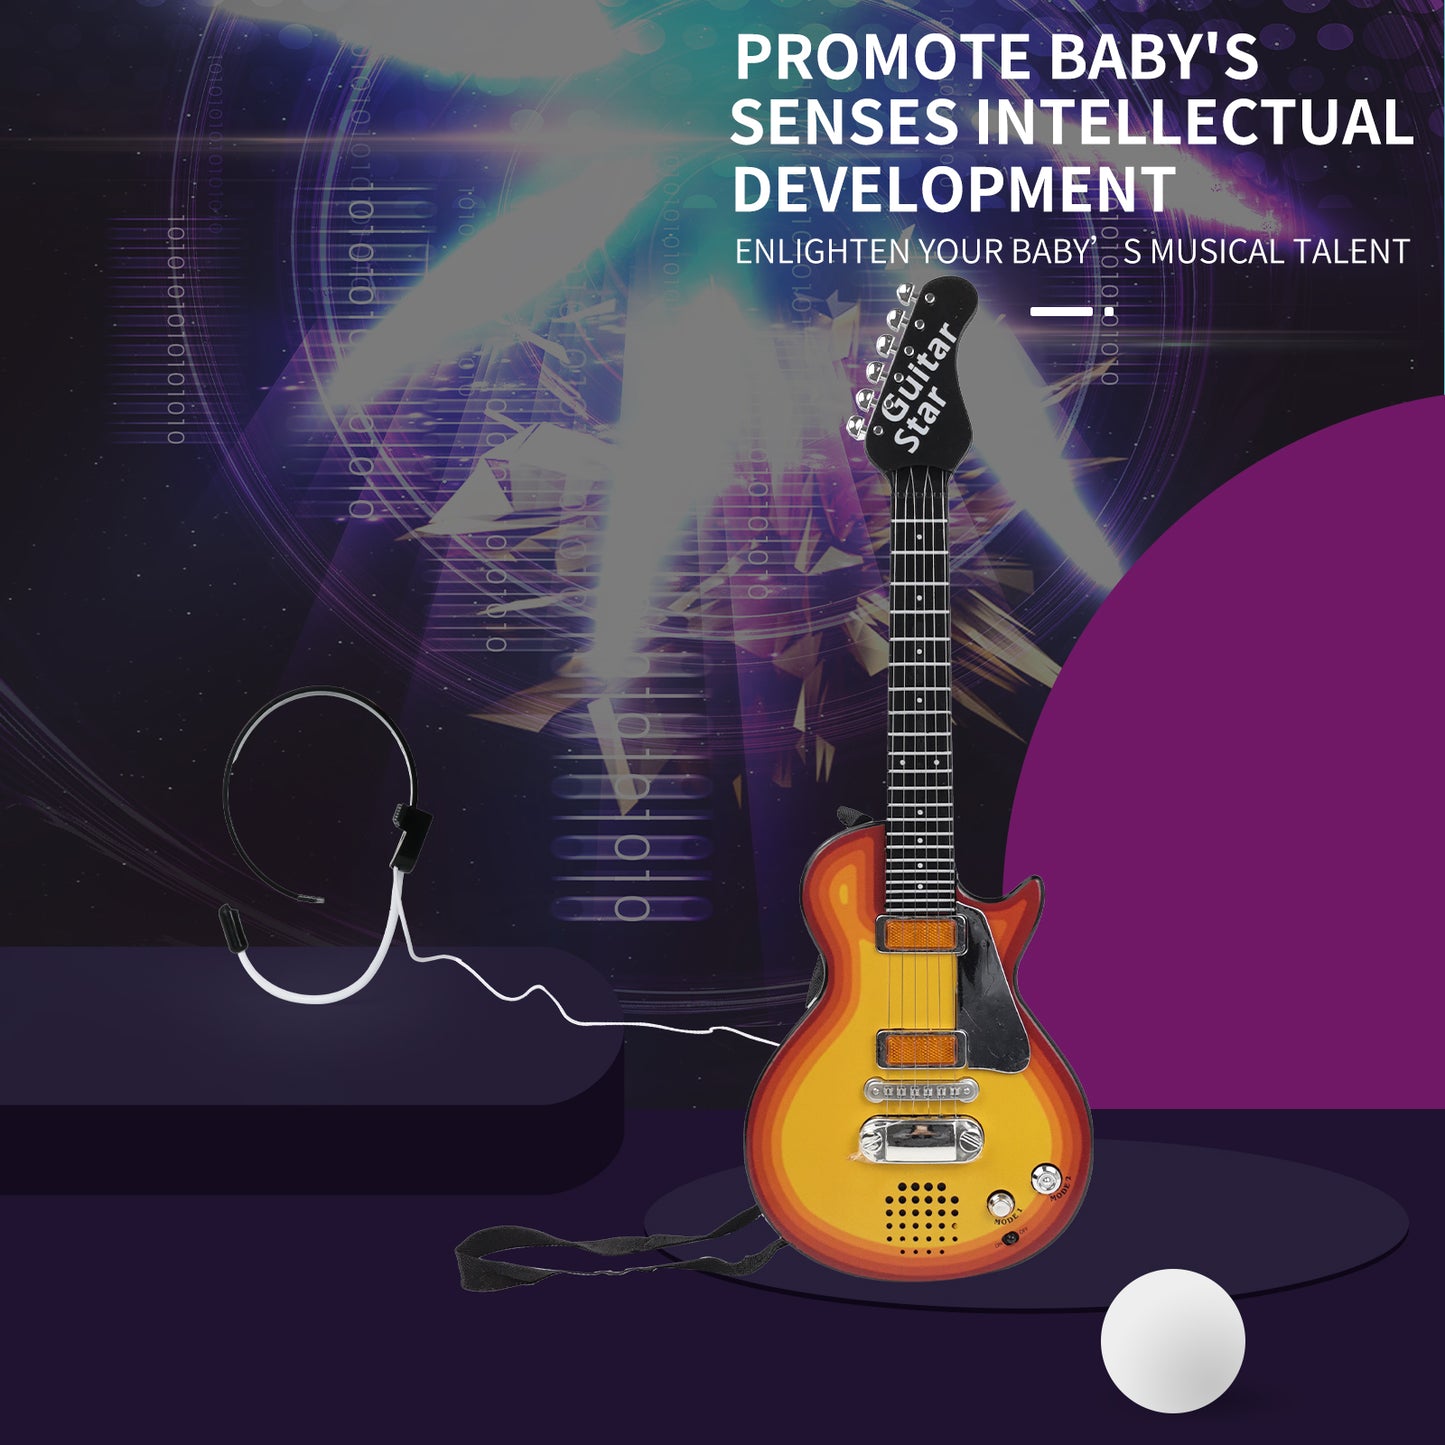 AOQIMITENJOY Musical Instrument Electronic Guitar Toys with Micphone LED Lighting Karaoke Birthday Gifts for Boys and Girls 3 Year Old+ HK-9080B